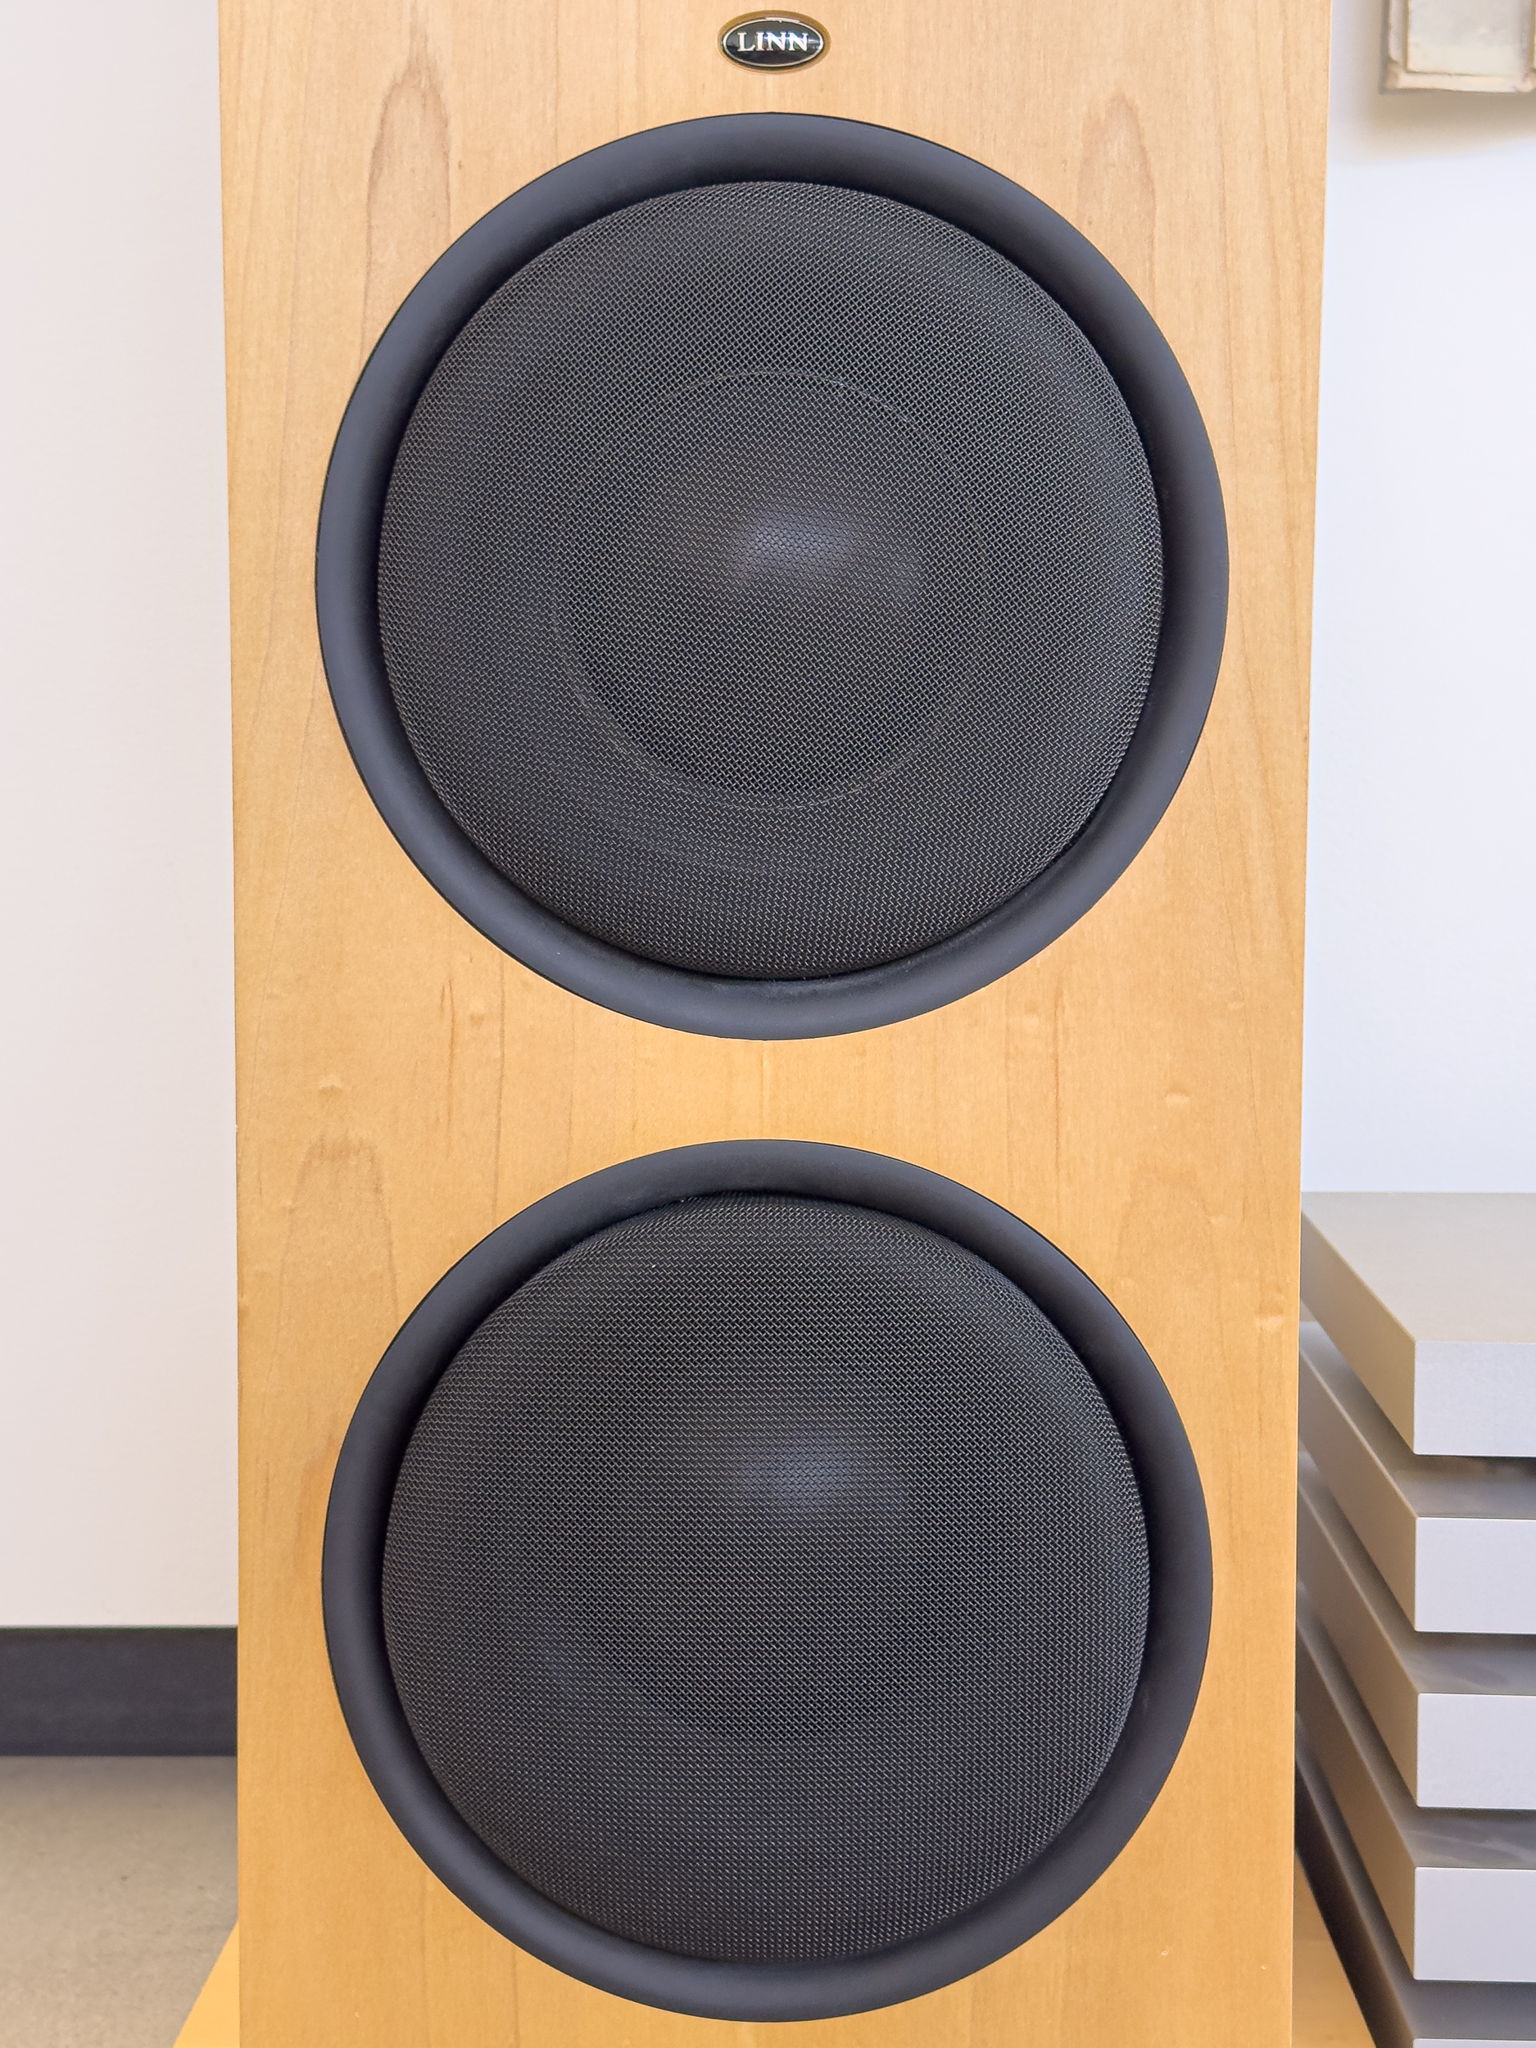 In the lower part of each speaker are a pair long-throw servo controlled bass drivers, each powered by its own internal 1500W switch-mode power amplifier. These deliver a very deep and precise low end that never gets boomy.